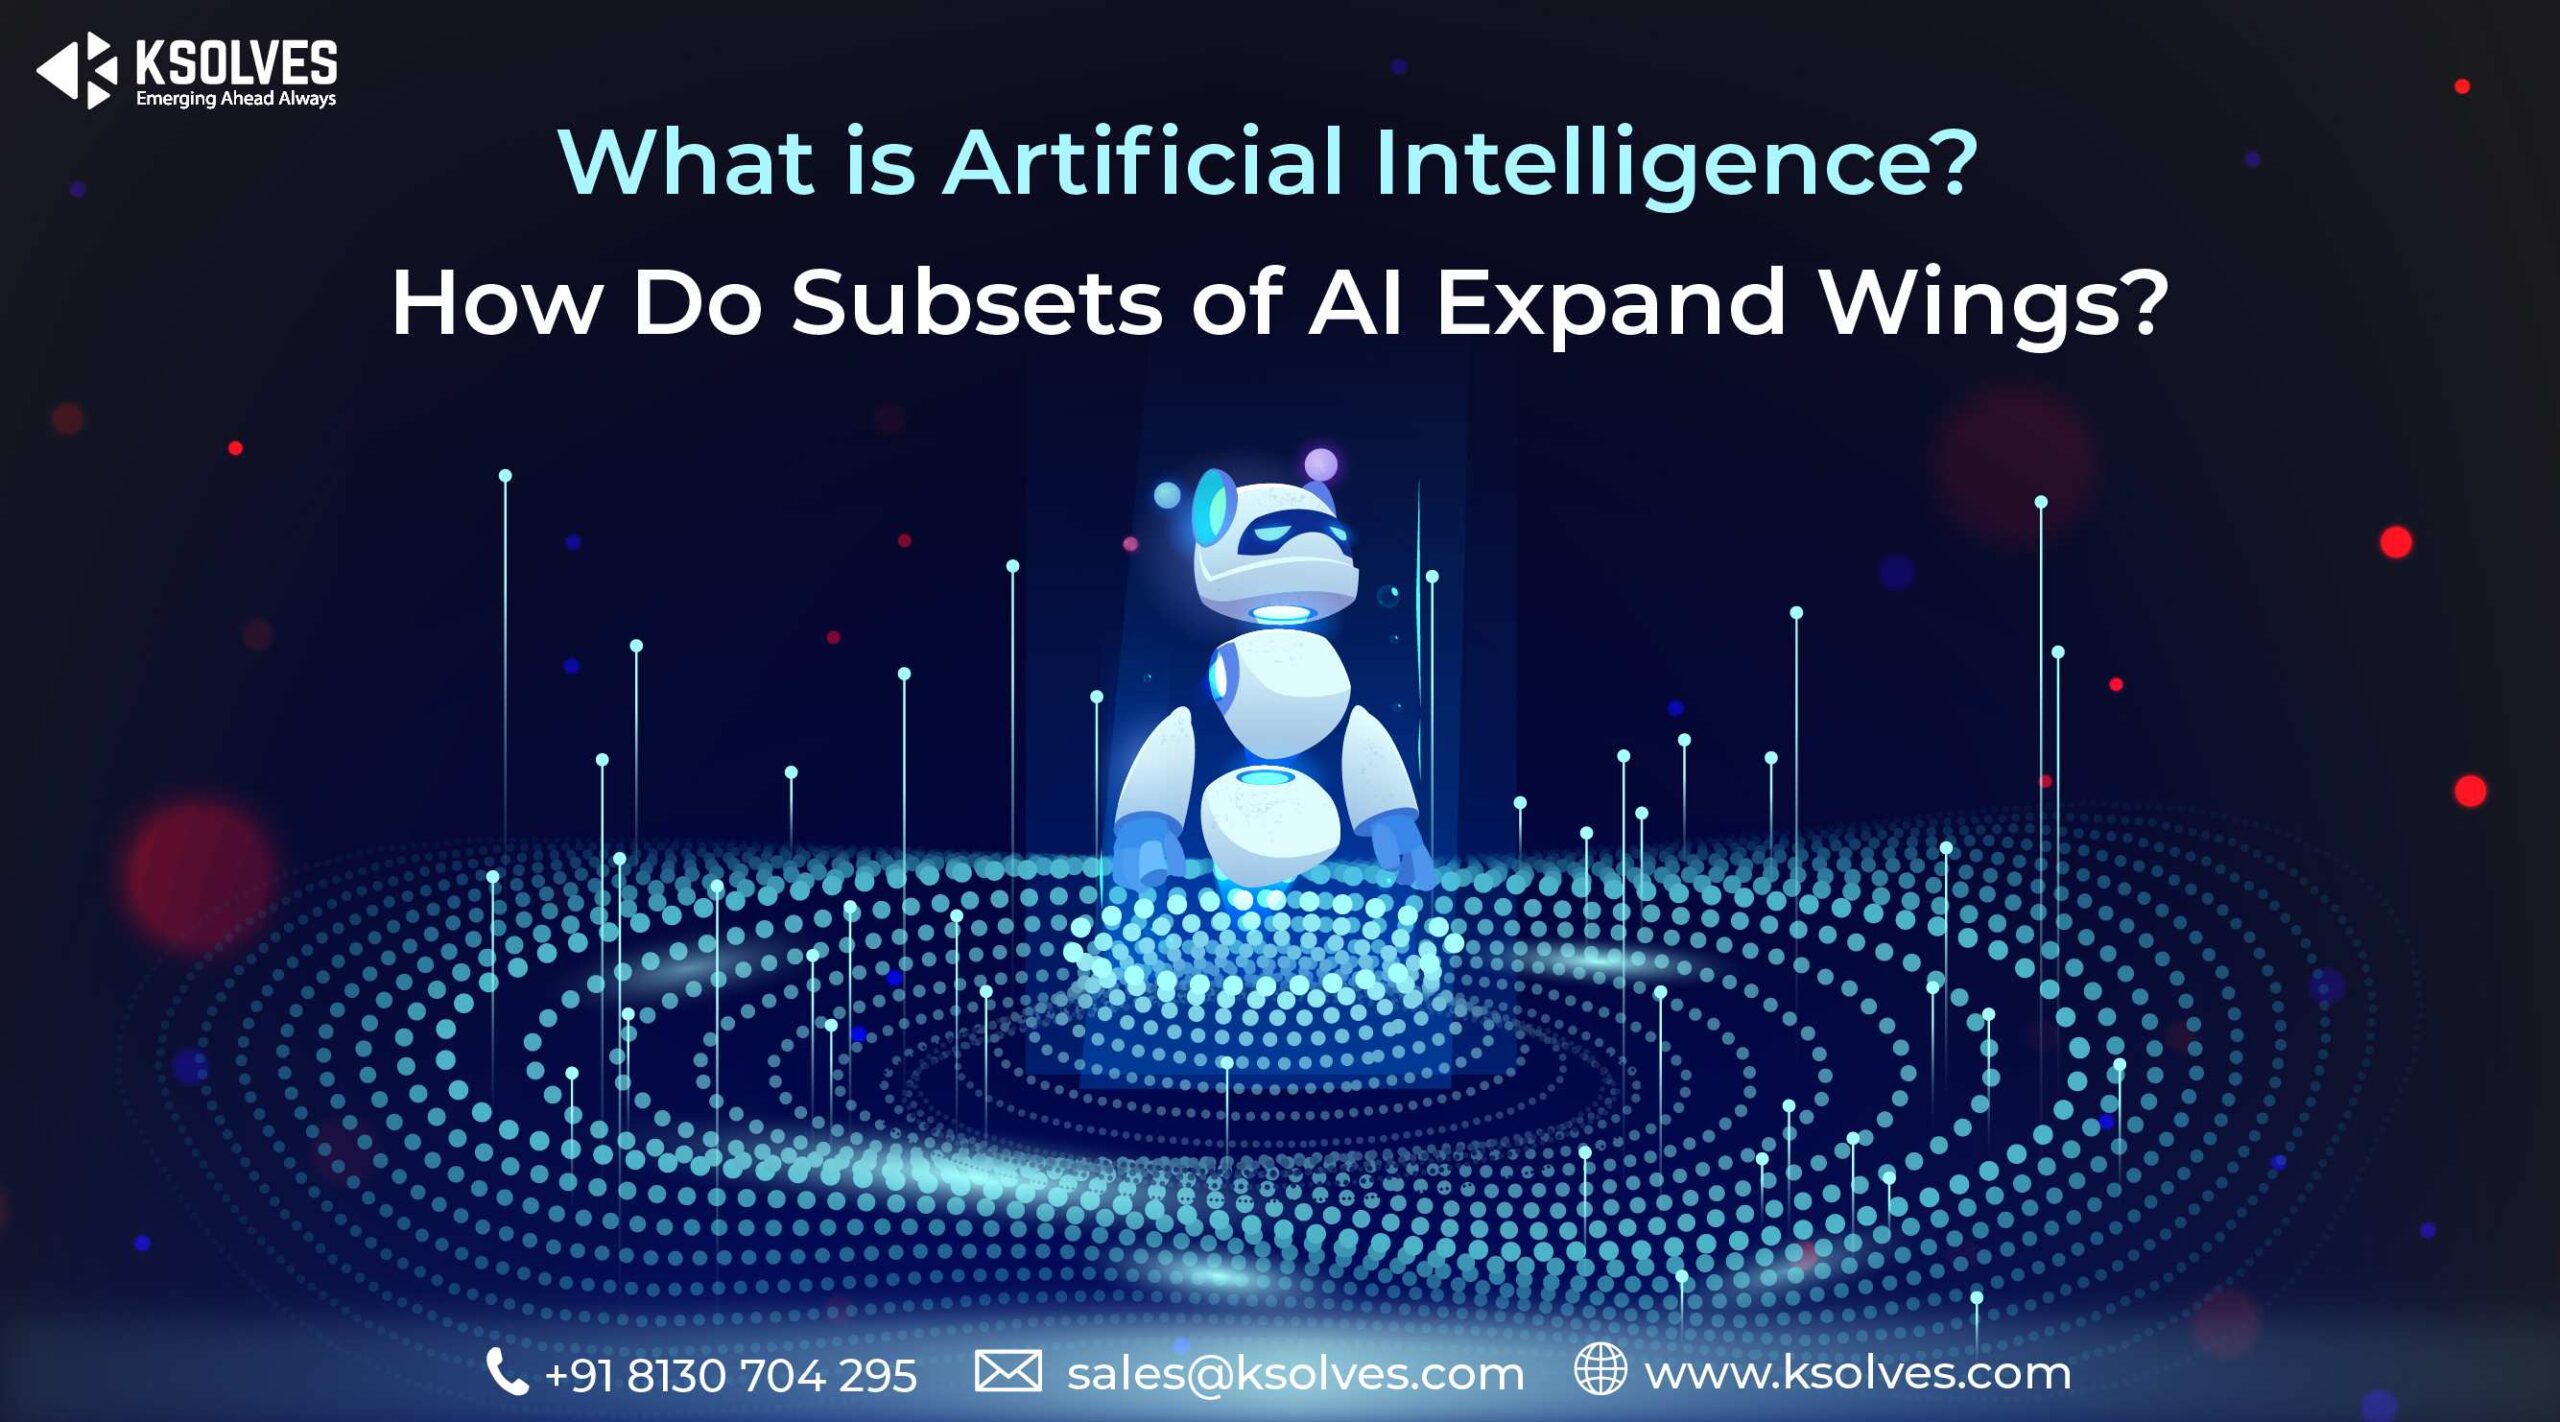 subsets of Artificial Intelligence